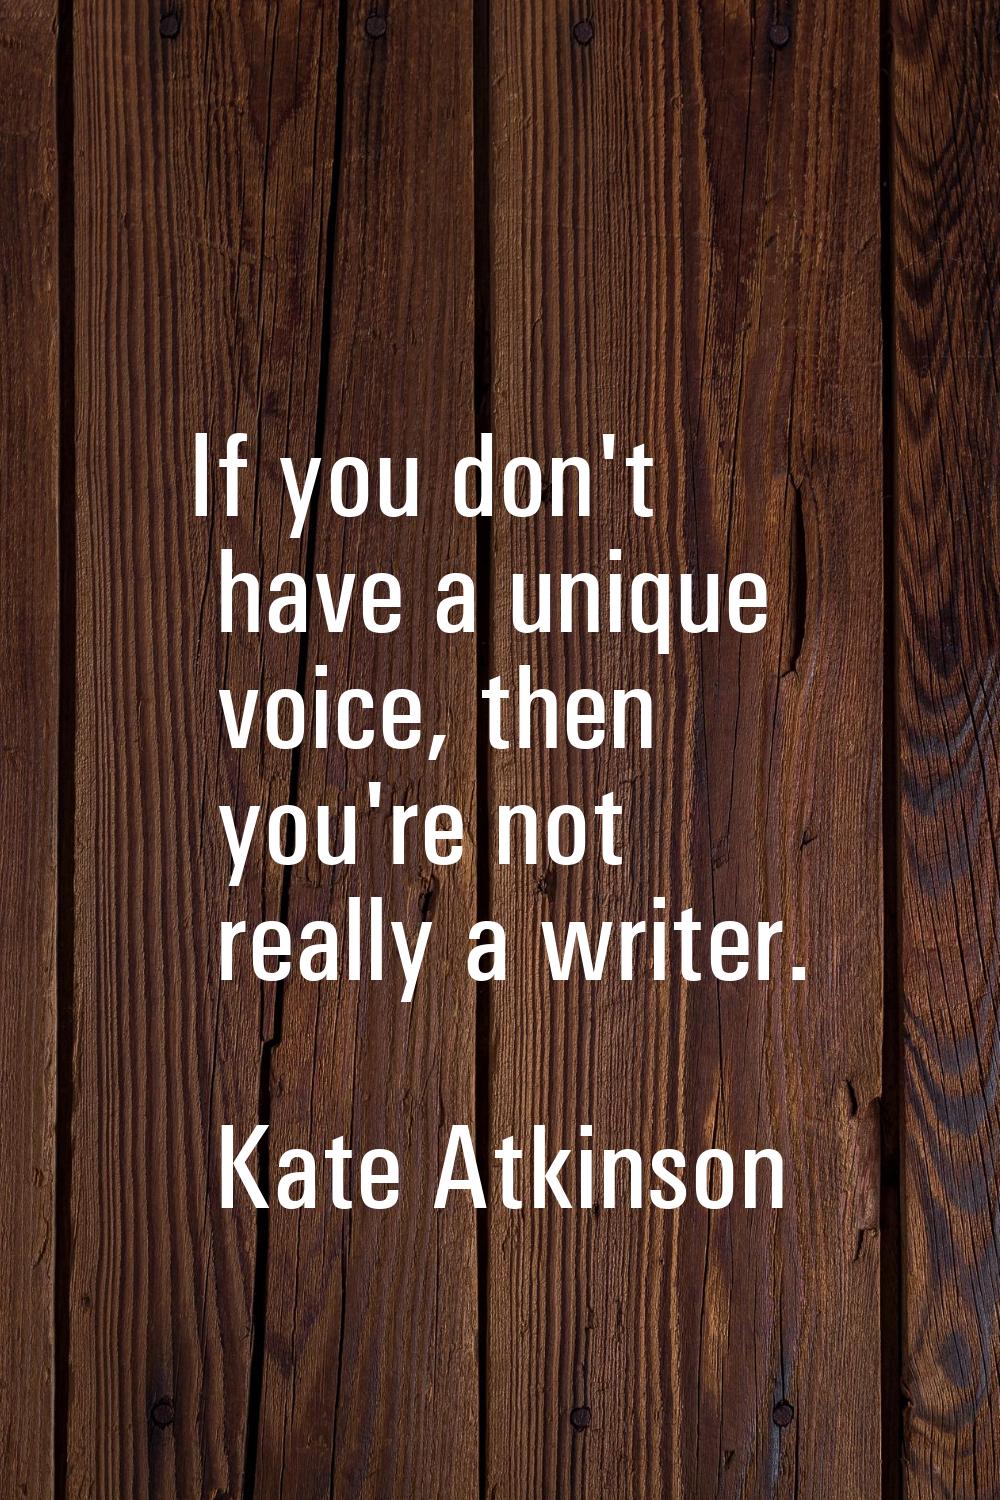 If you don't have a unique voice, then you're not really a writer.